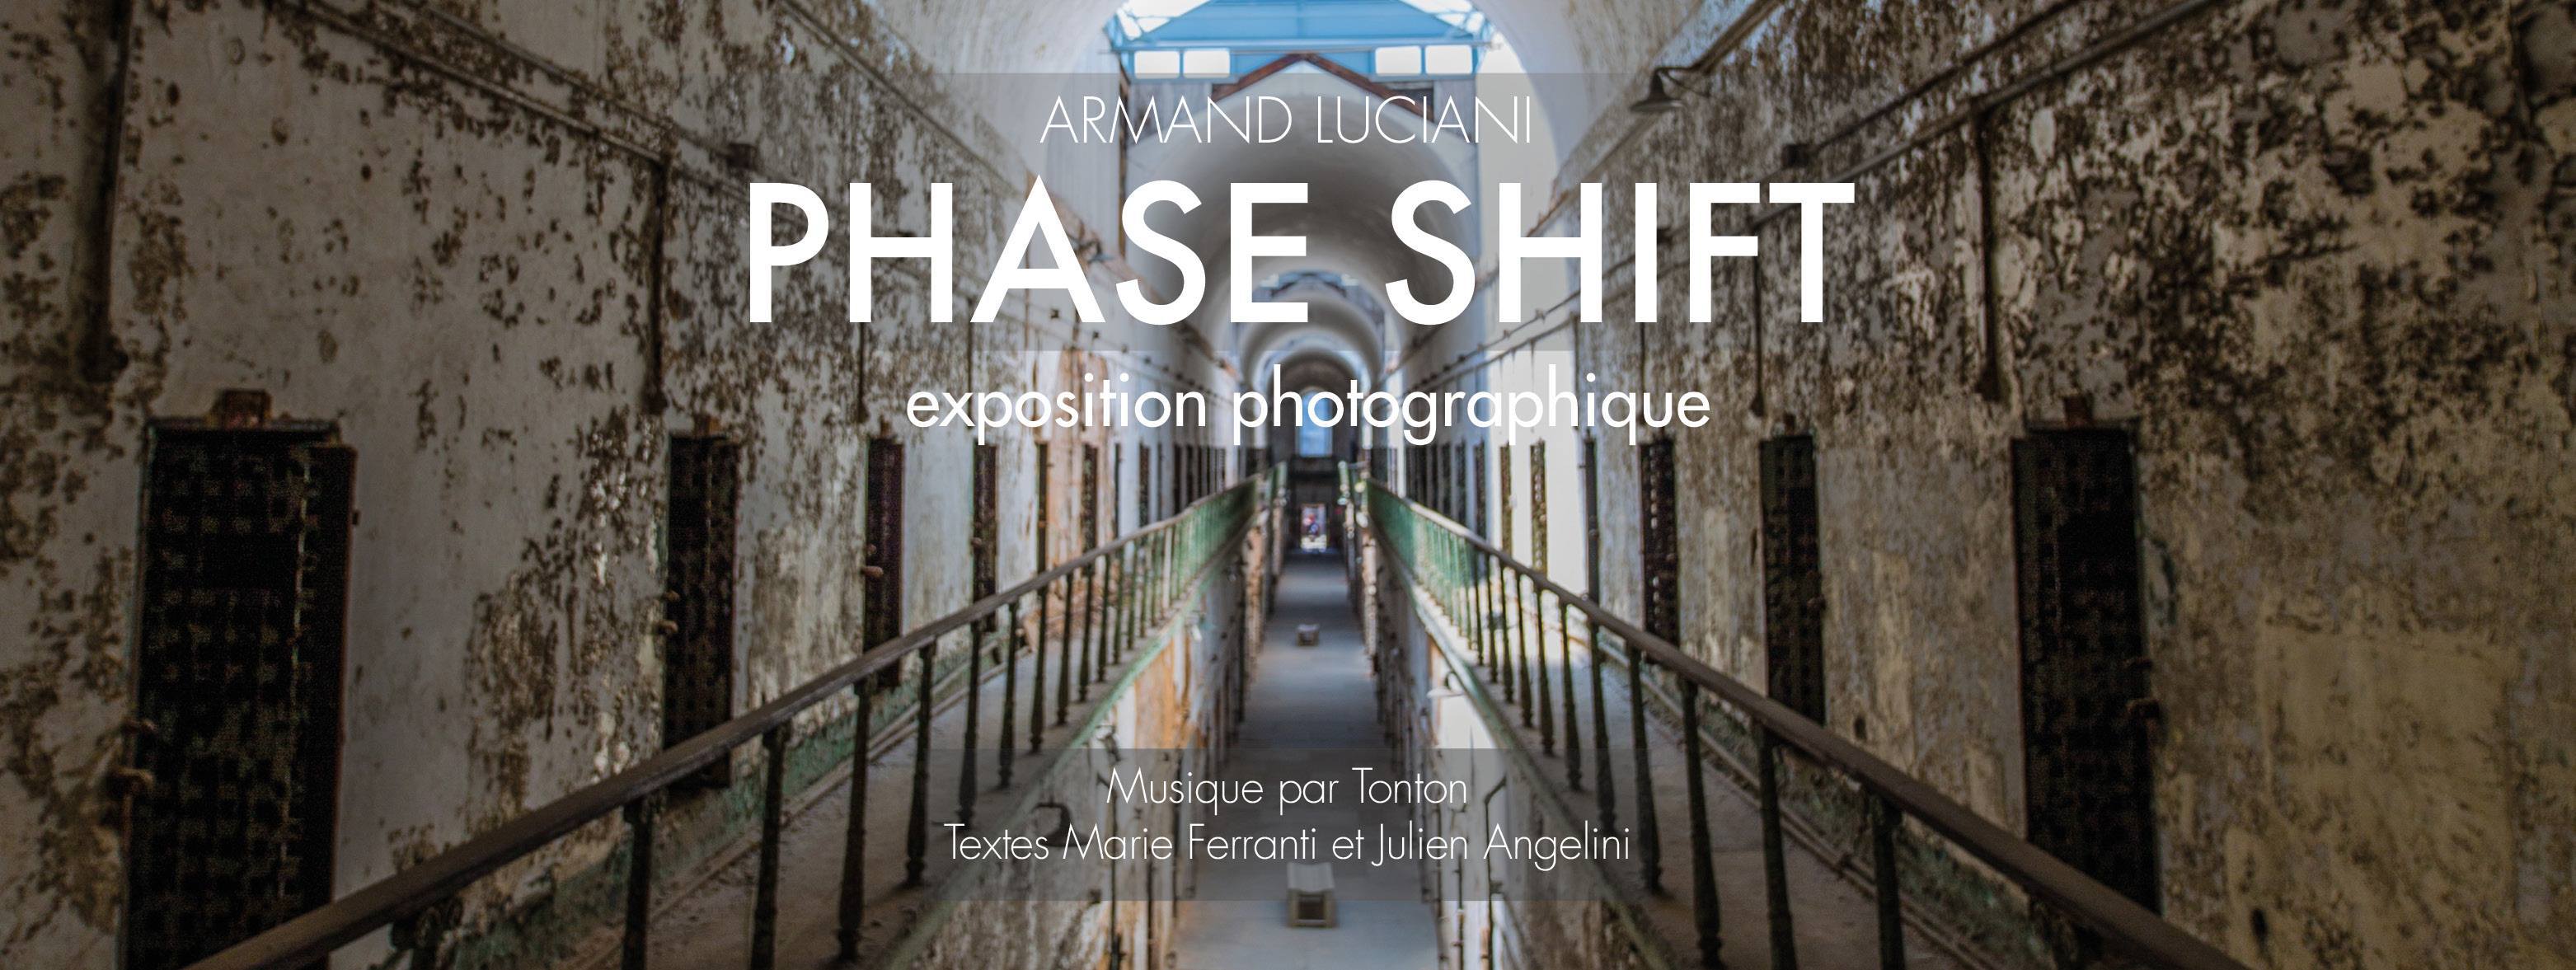 Exposition reportée : Phase Shift/Armand Luciani